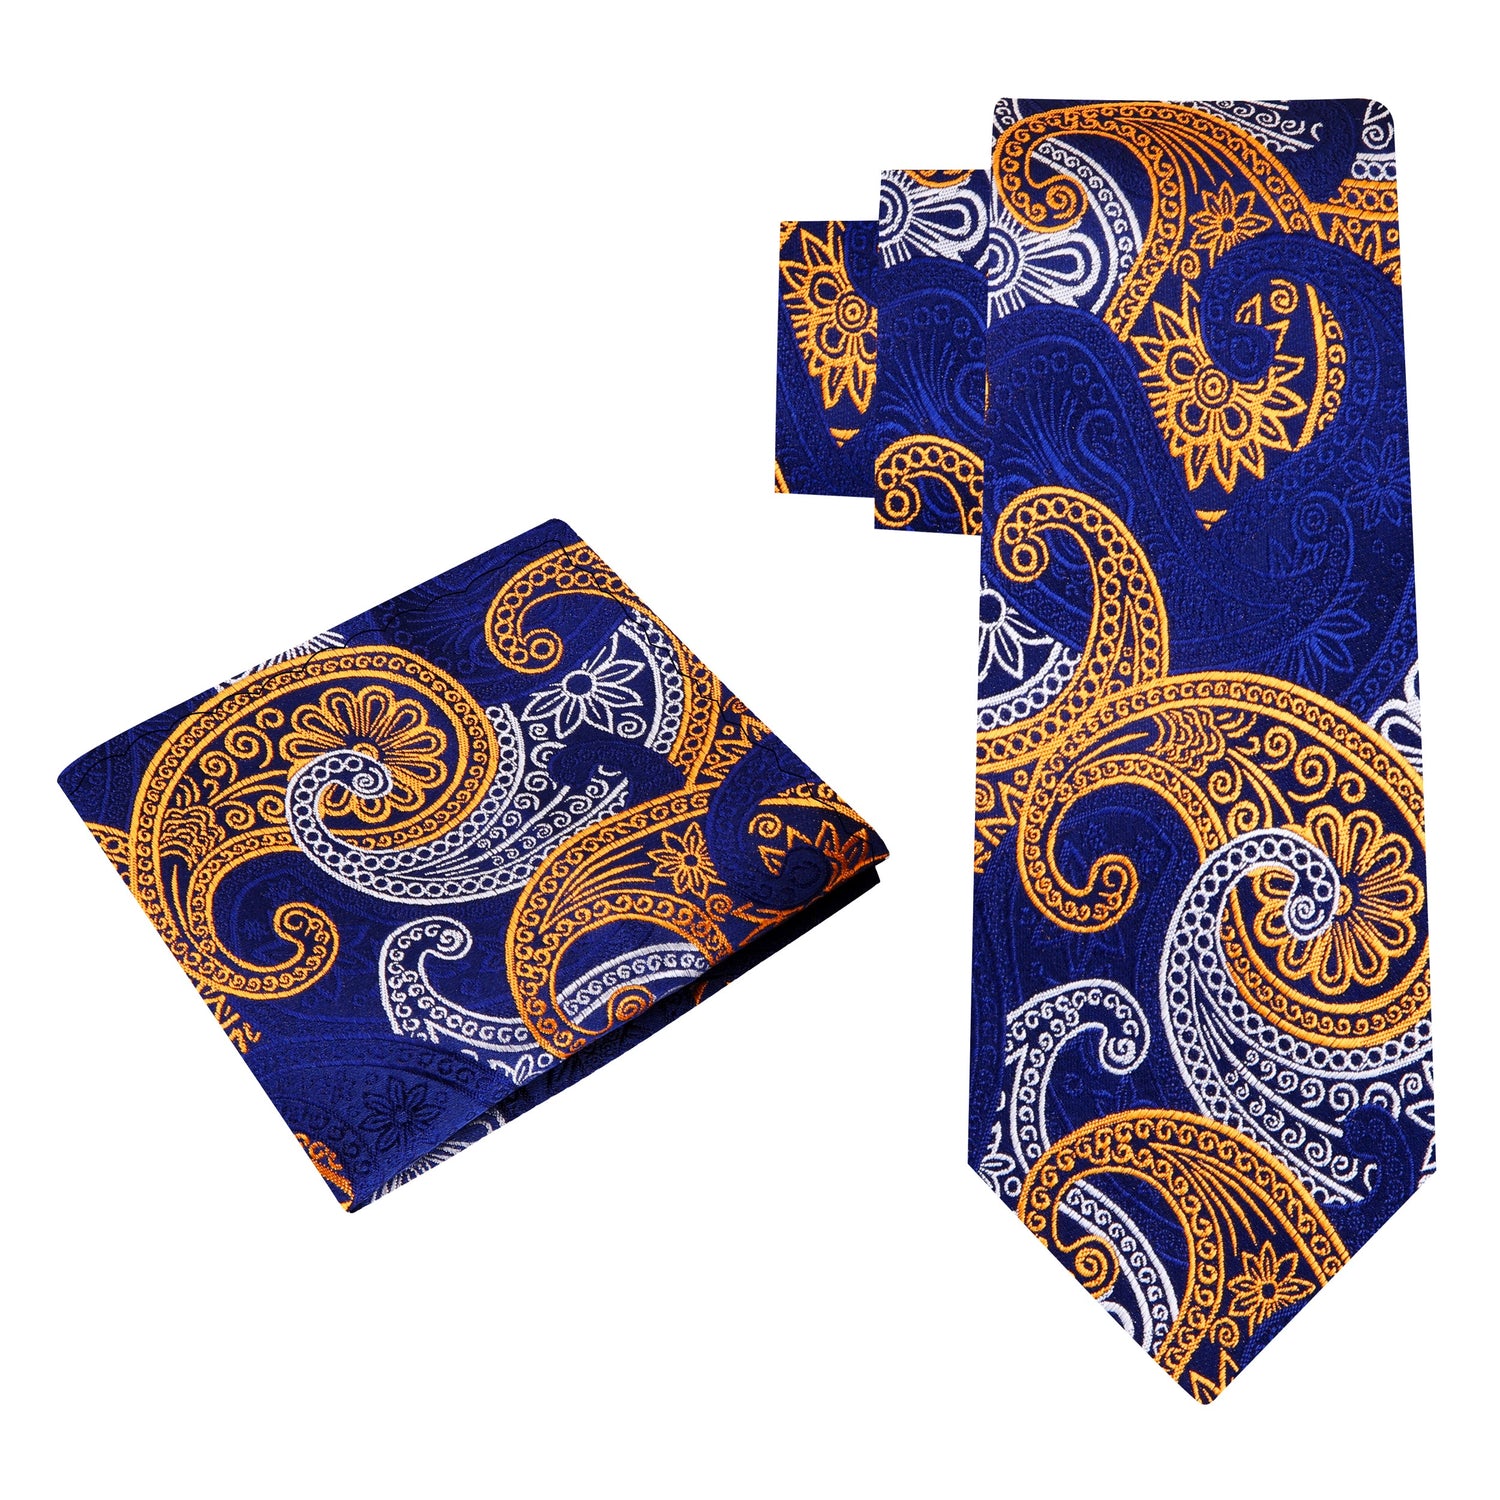 Alt View: A Dark Blue, Yellow, White Paisley Pattern Necktie With Matching Pocket Square